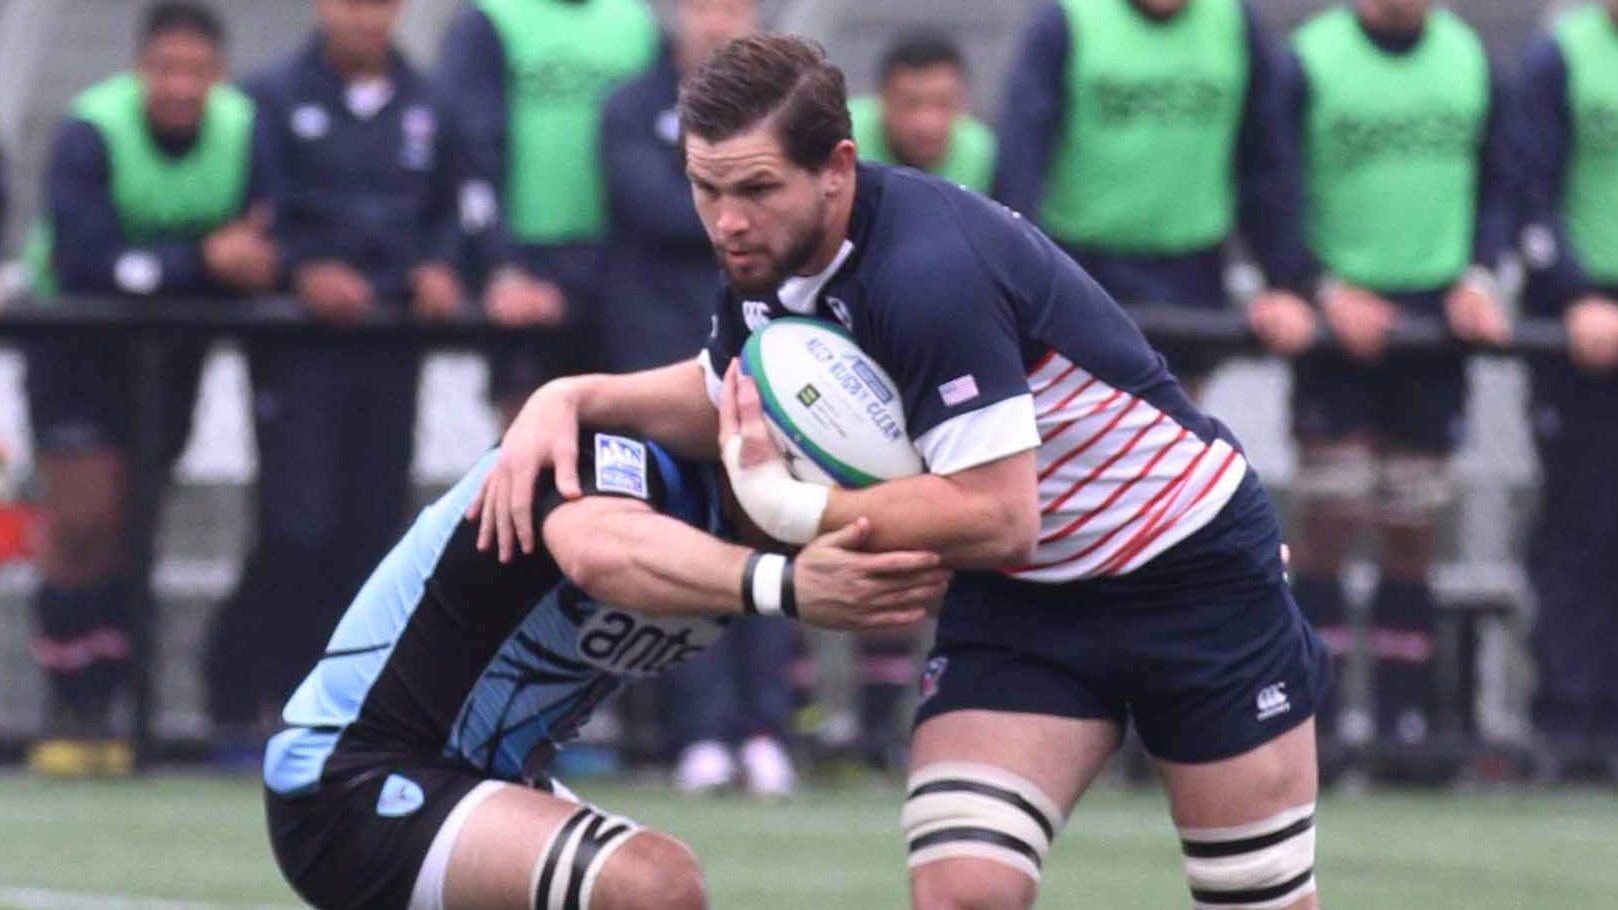 Danny Barrett playing for the USA Selects in the older version of the Americas Rugby Championship in 2013. Judy Teasdale photo.